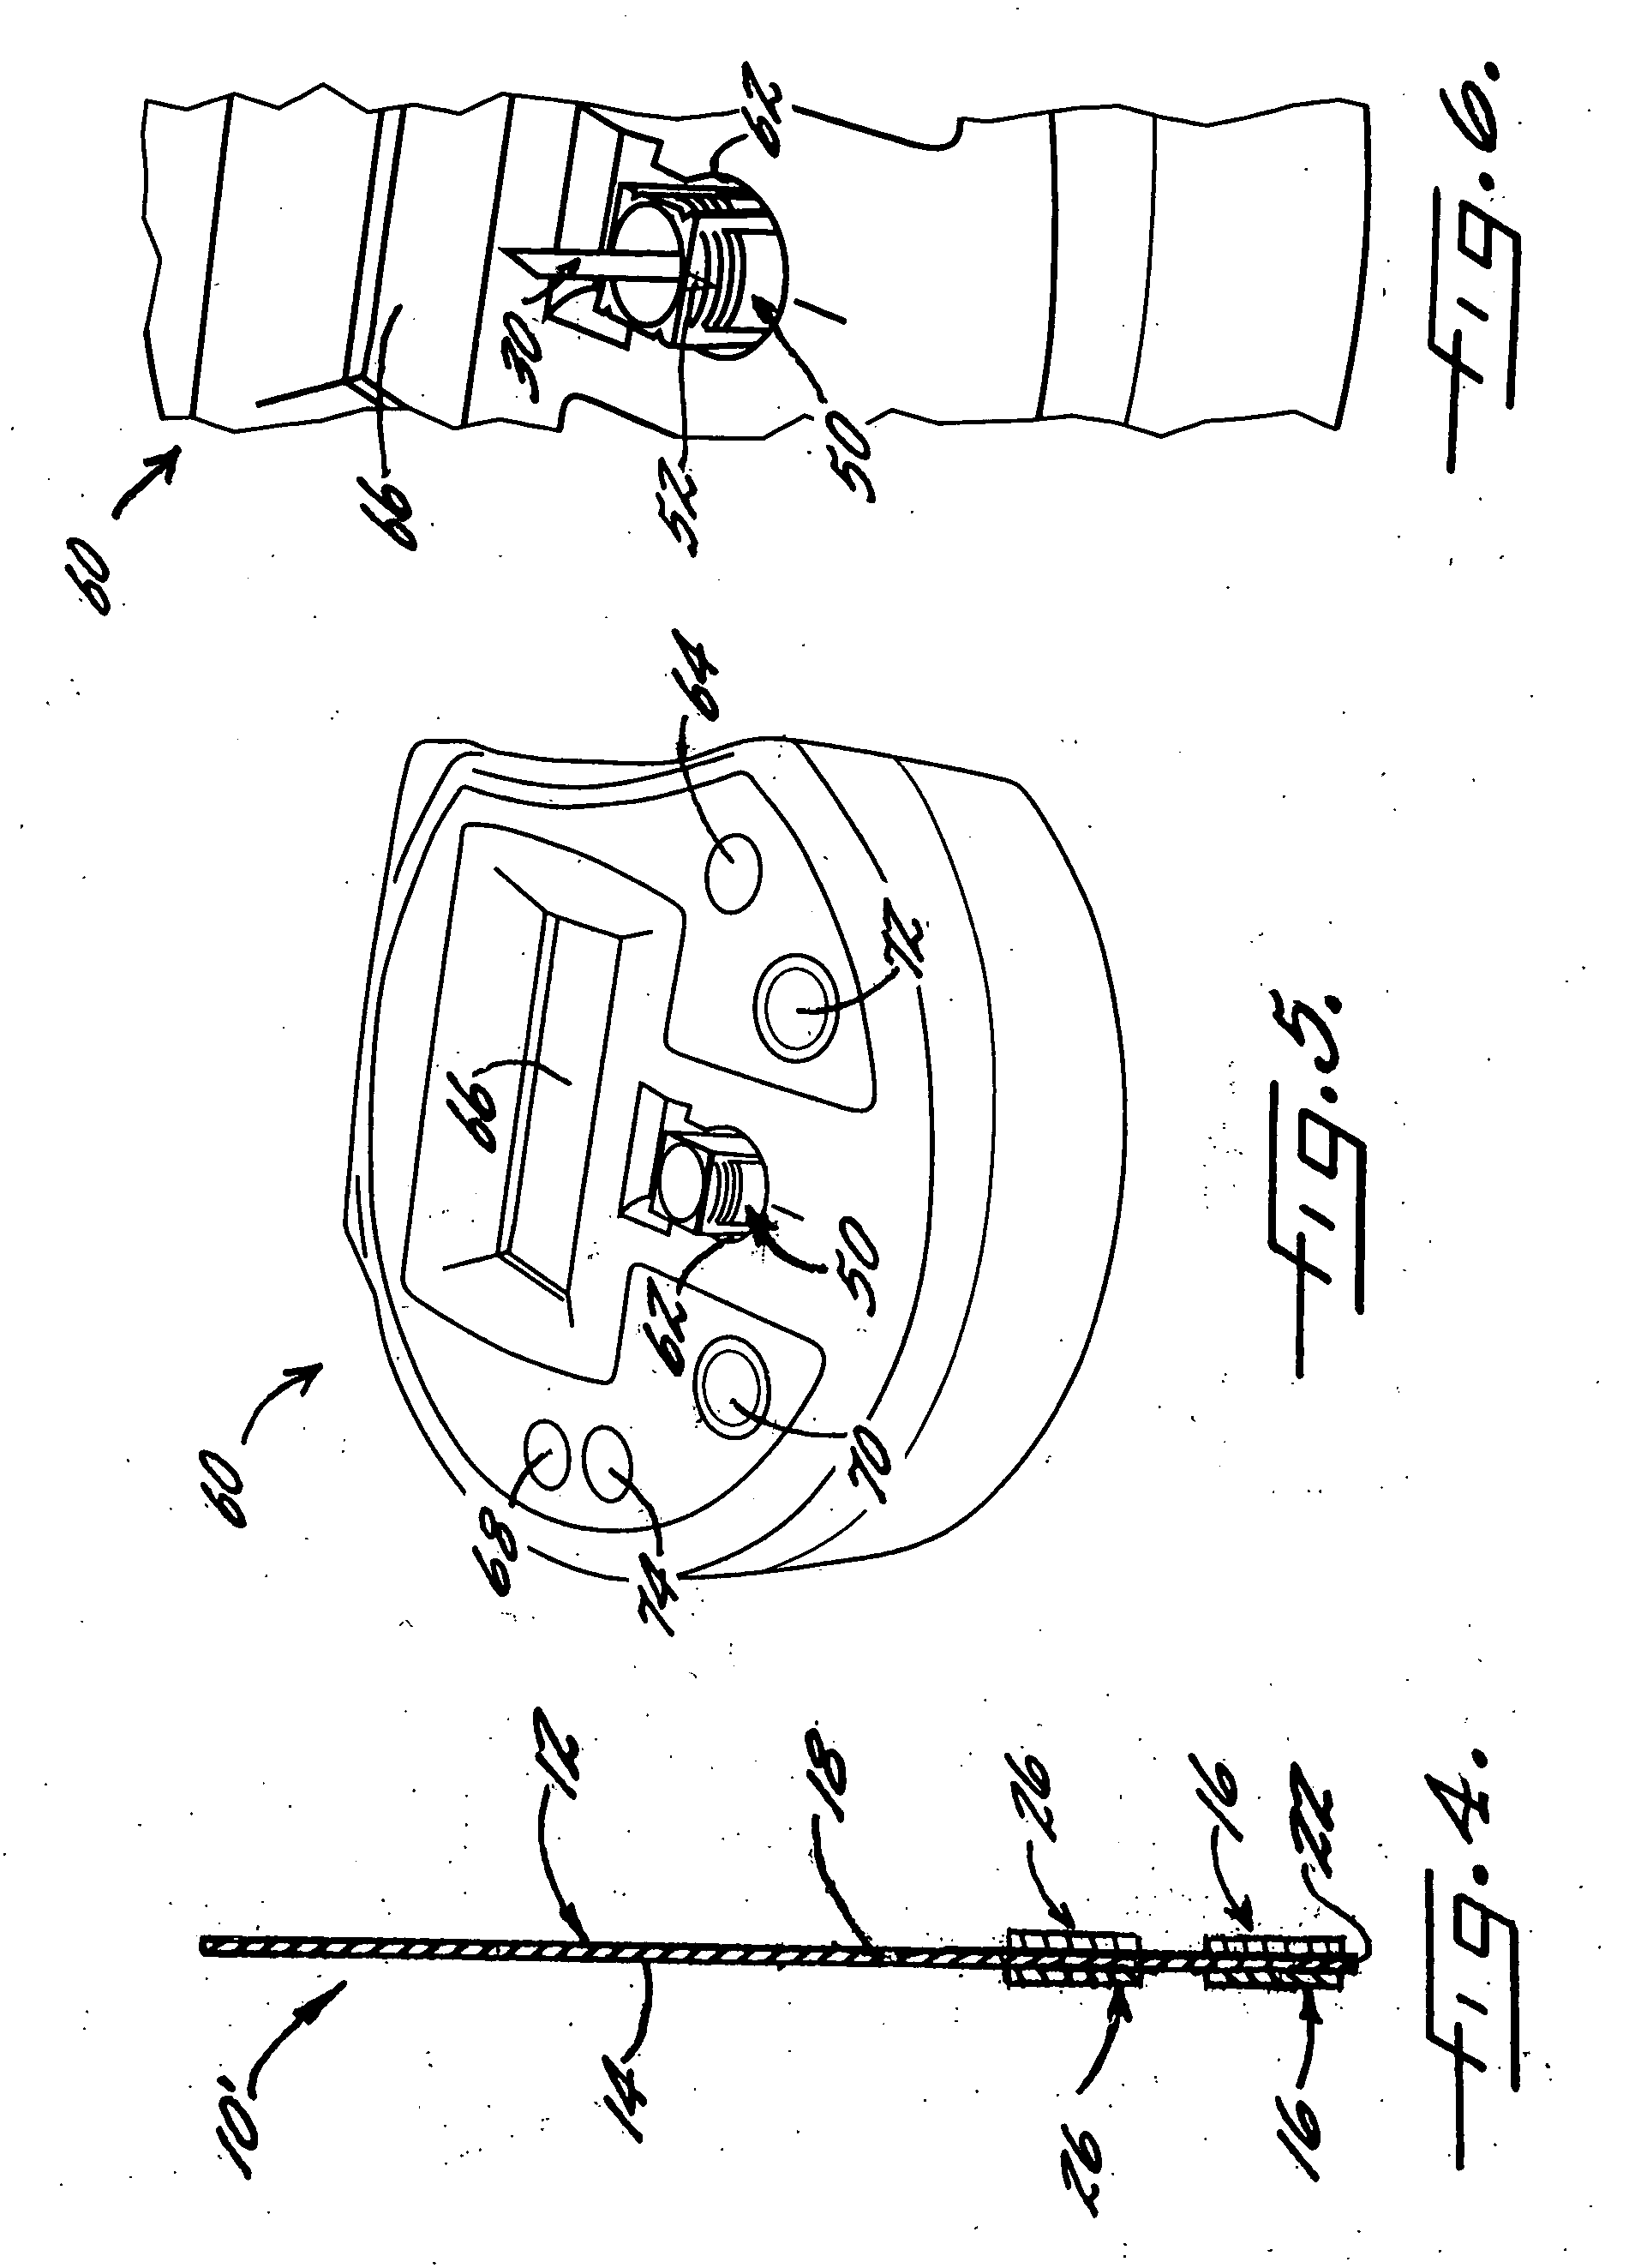 Reagent delivery device and method